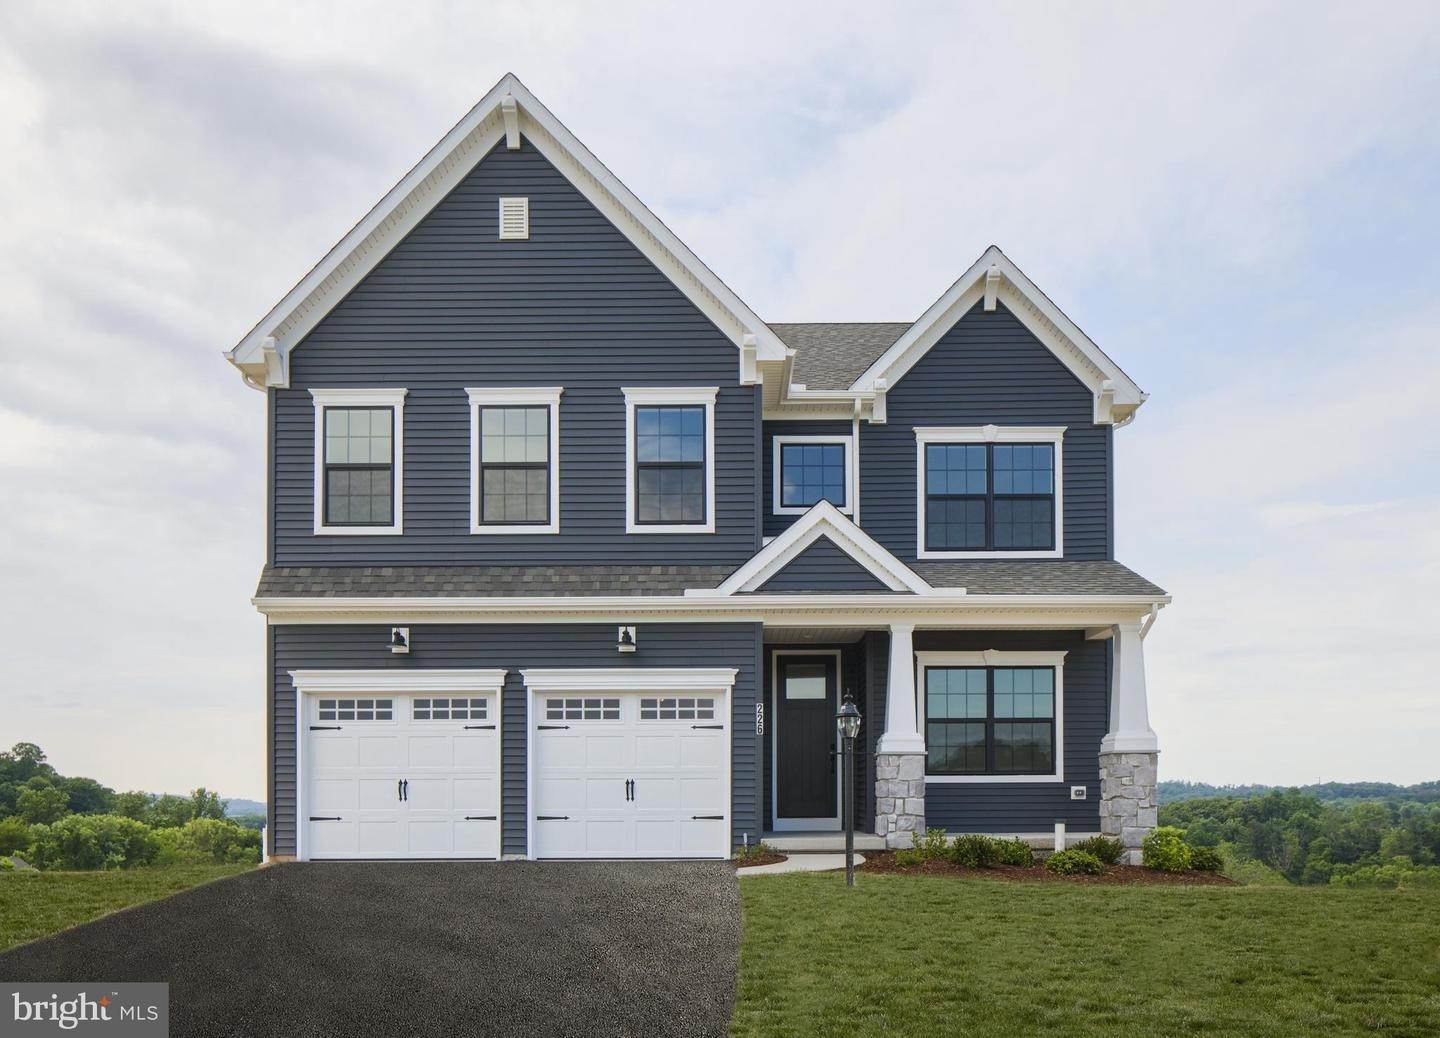 2. Residential for Sale at 660 LAWRENCE BLVD #LACHLAN PLAN Lancaster, Pennsylvania 17601 United States